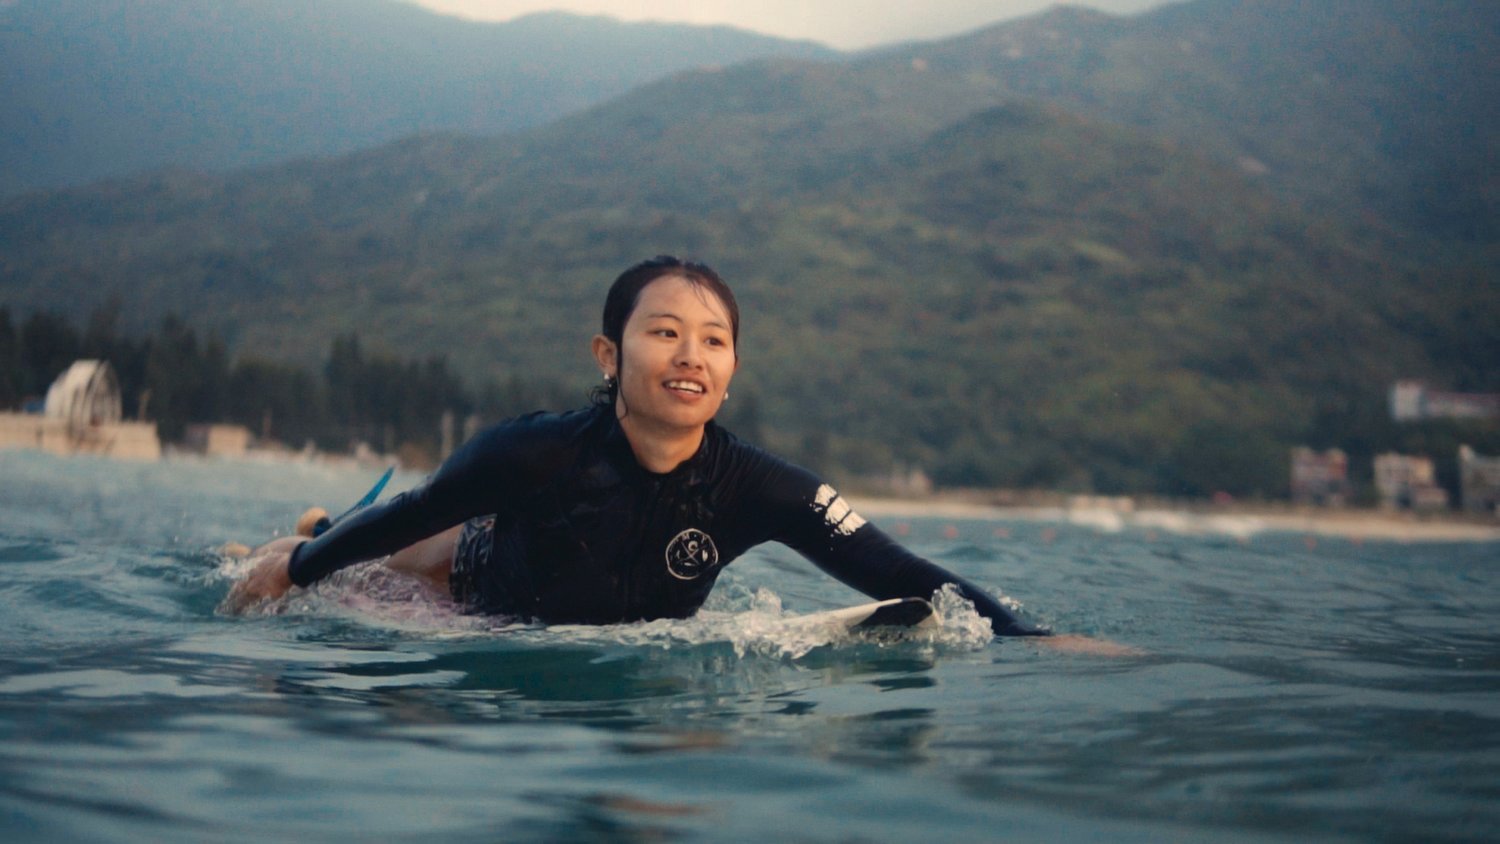 Lolo, one of the central characters of the documentary, rides out to catch a wave in China’s Hainan province, known for its tropical beach environment.